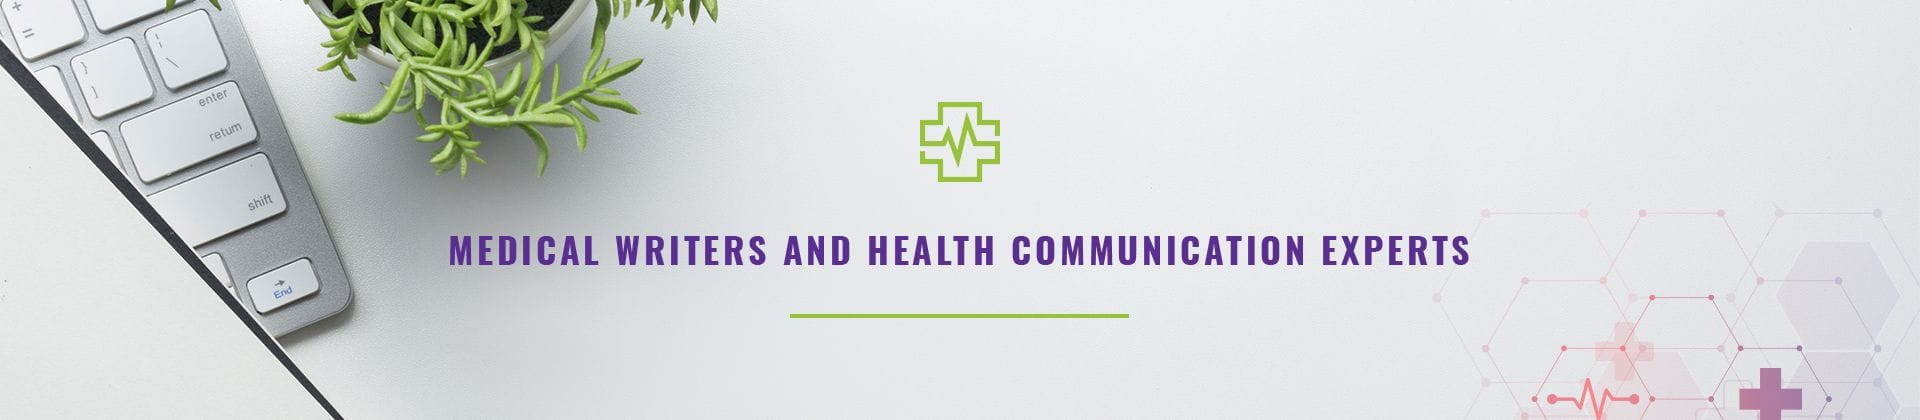 KMG Communications - Your Health & Medical Writers in Melbourne